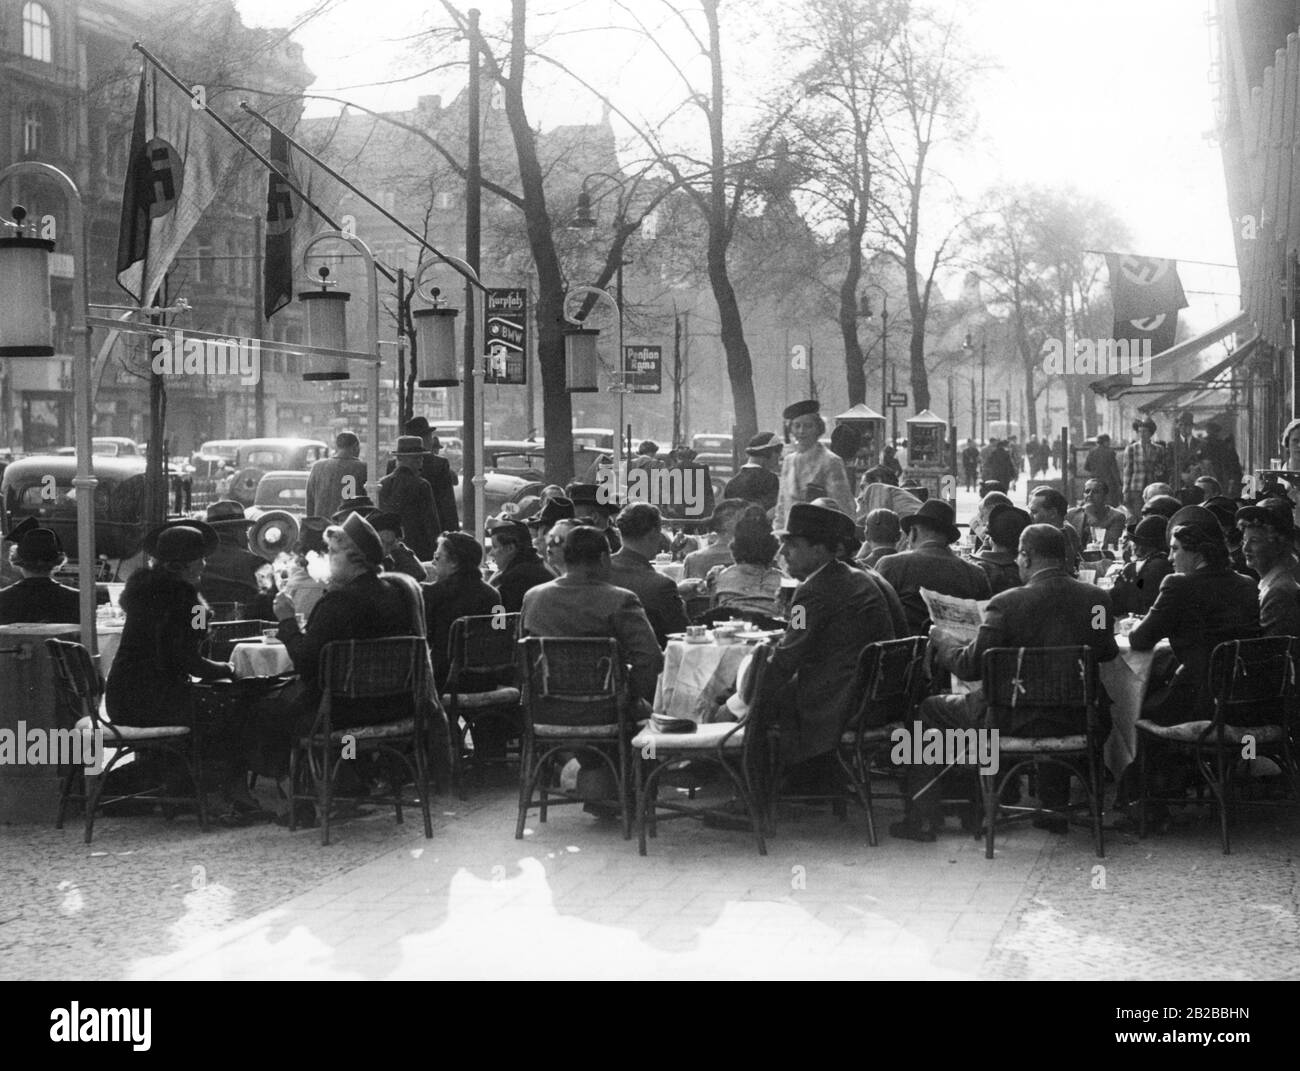 People sit in a cafe on the sidewalk at Kurfuerstendamm in Berlin. Swastika flags are hoisted on the right on the house and on the left on the street lamps. Stock Photo